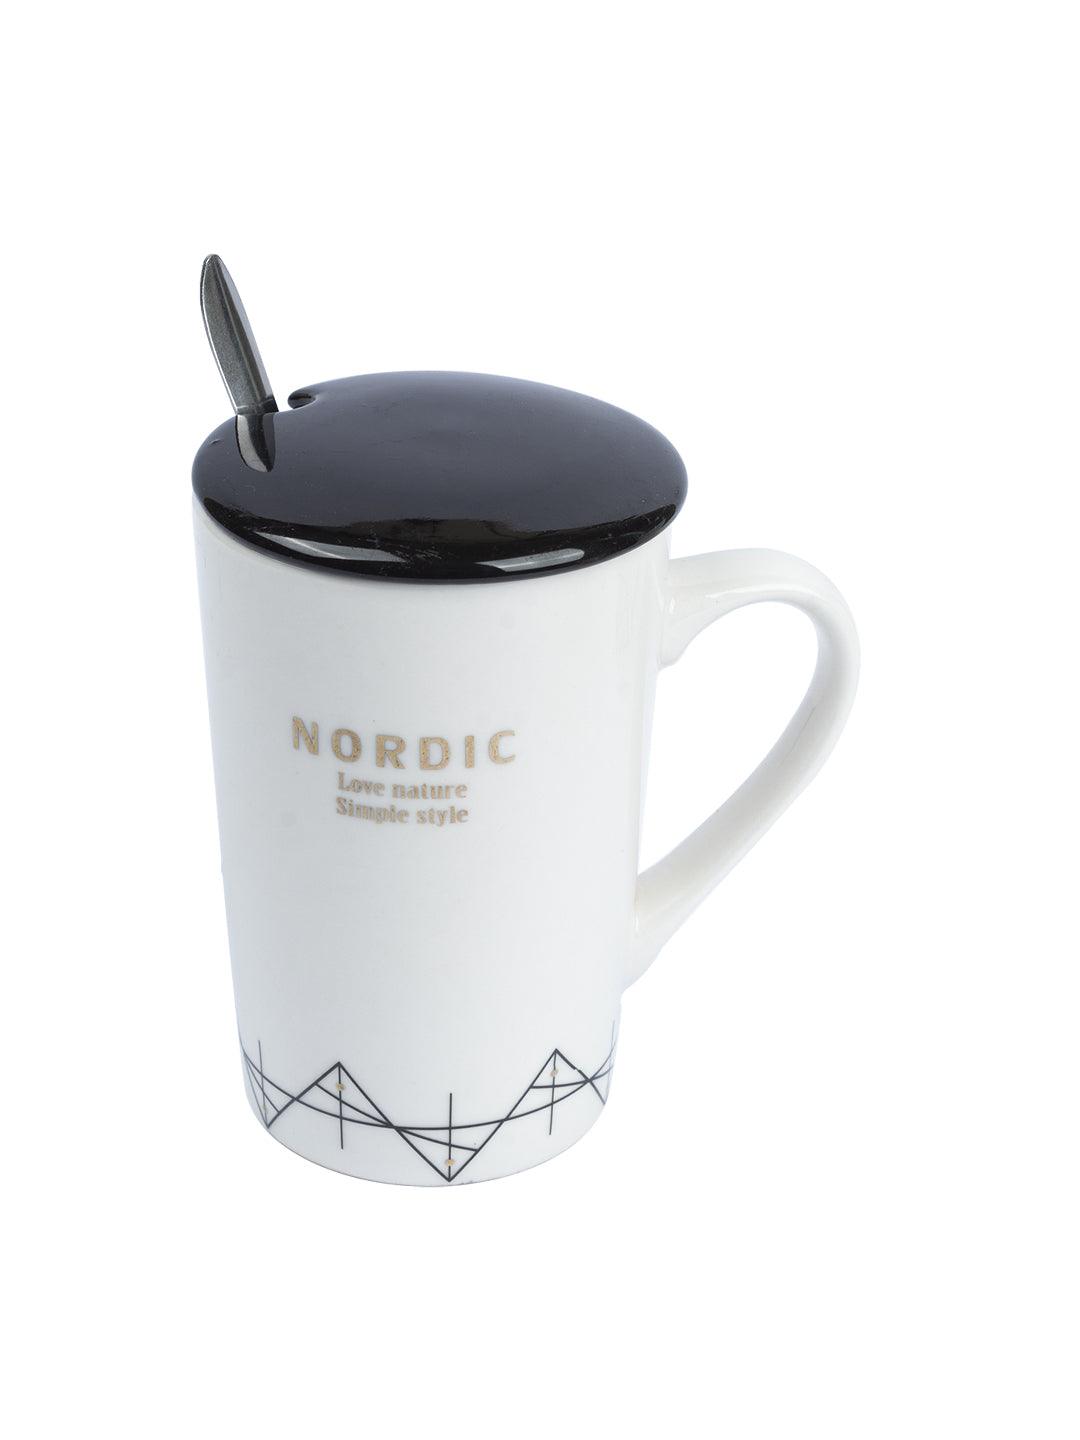 "NORDIC" Coffee Mug With Ceramic Lid and Spoon - White, 450mL - MARKET 99